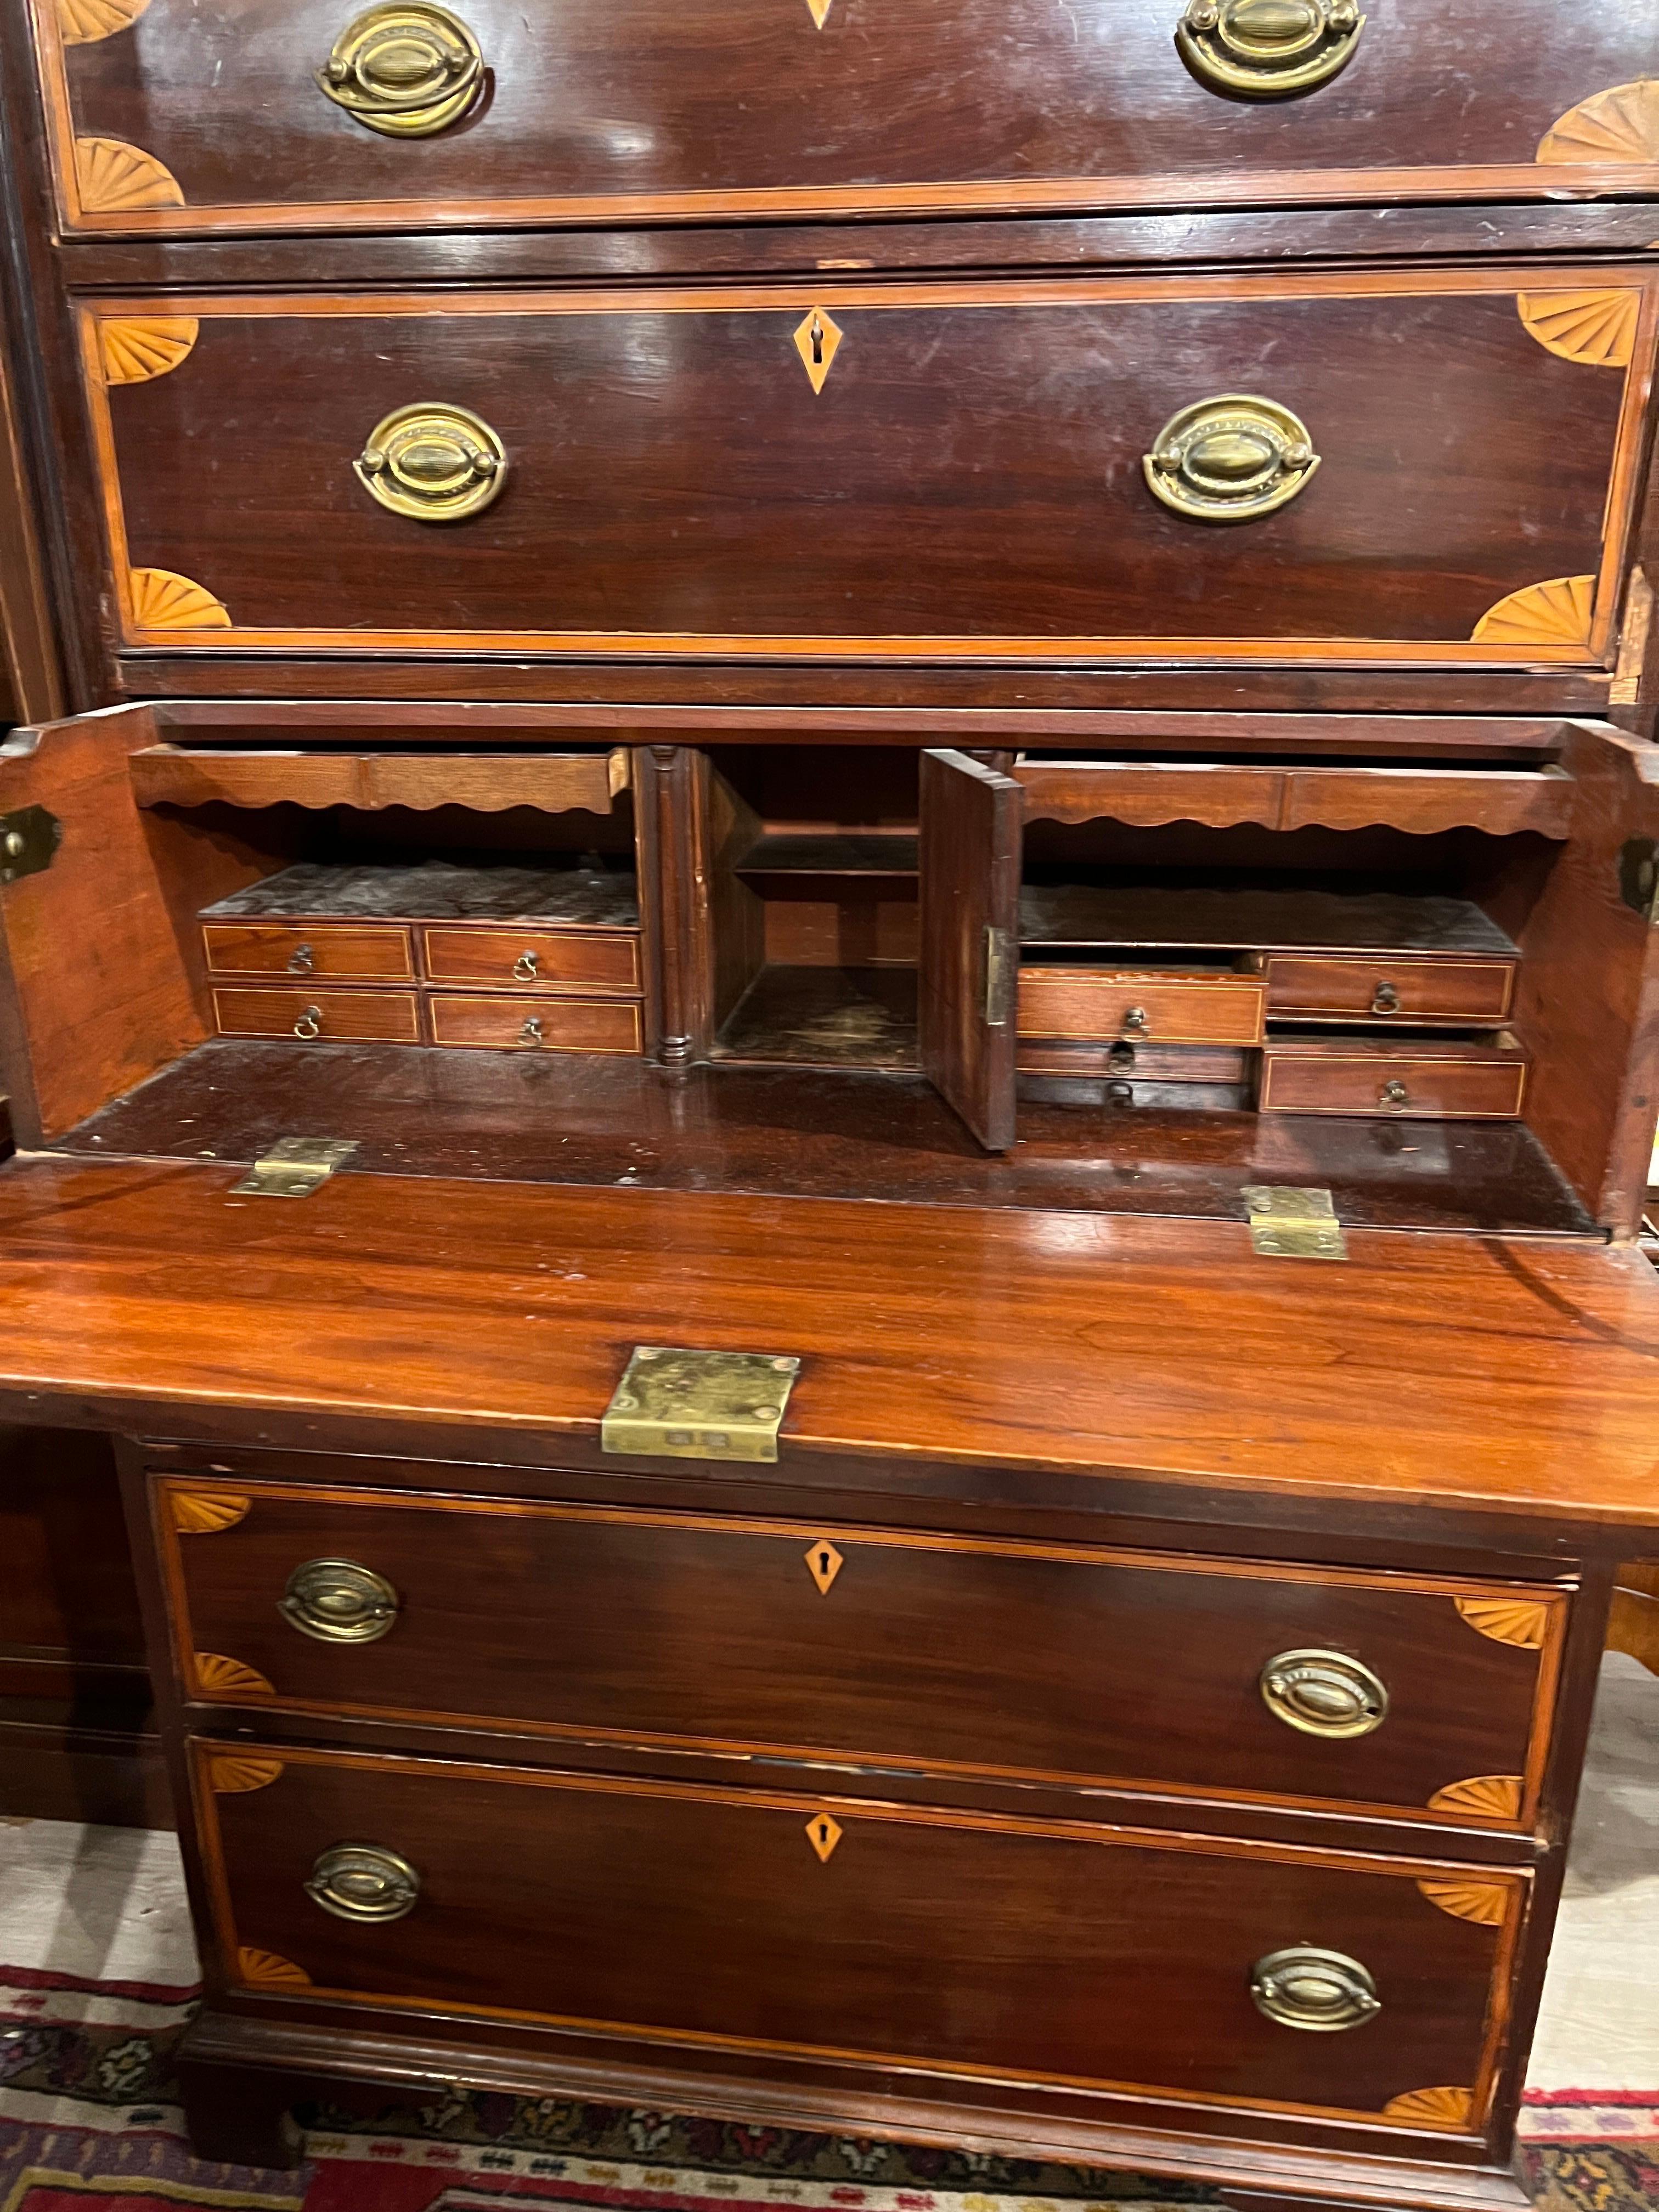 18th Century English George III Mahogany Inlaid Secretaire Chest of Drawers 1700 For Sale 3